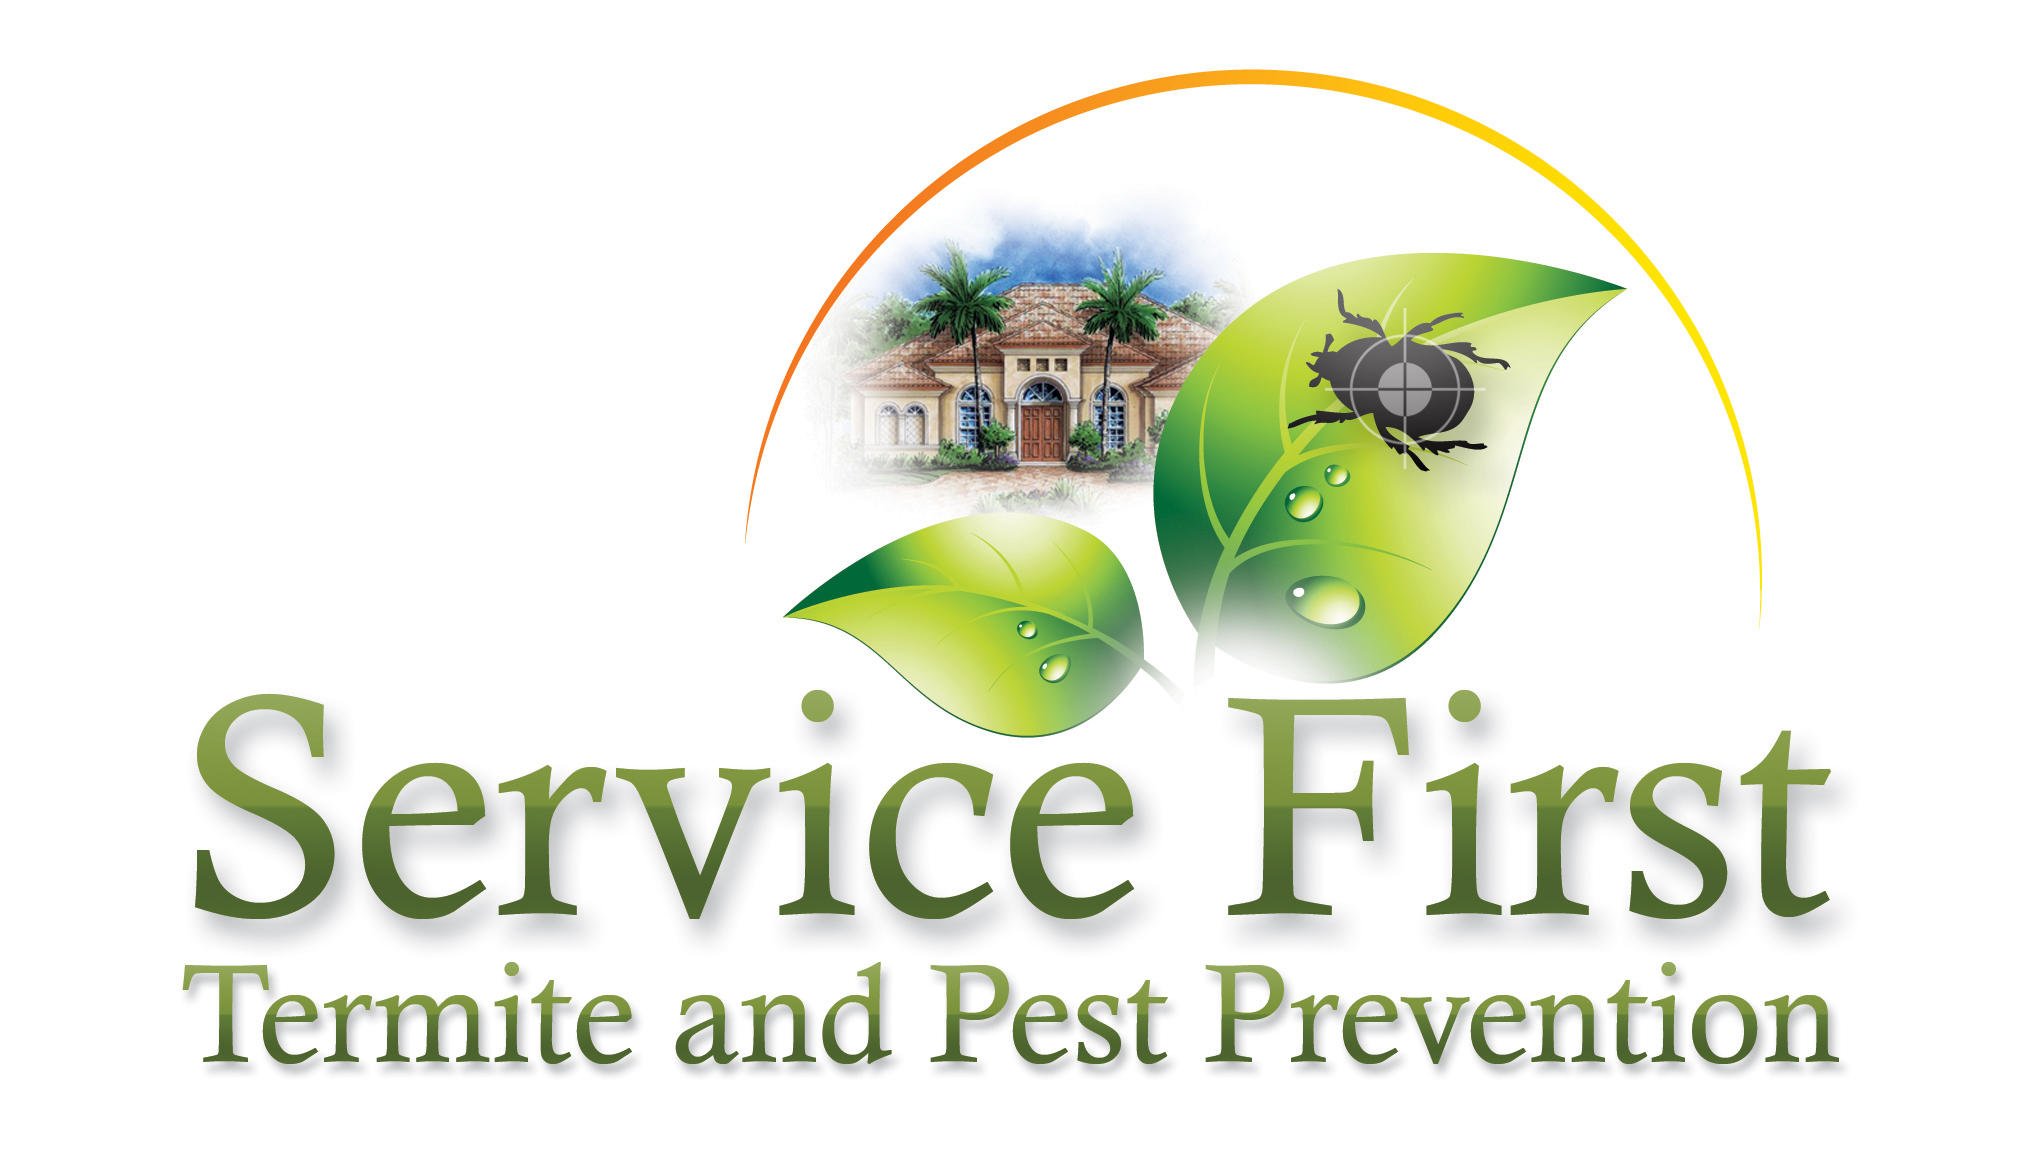 Service First Termite and Pest Prevention, LLC Logo